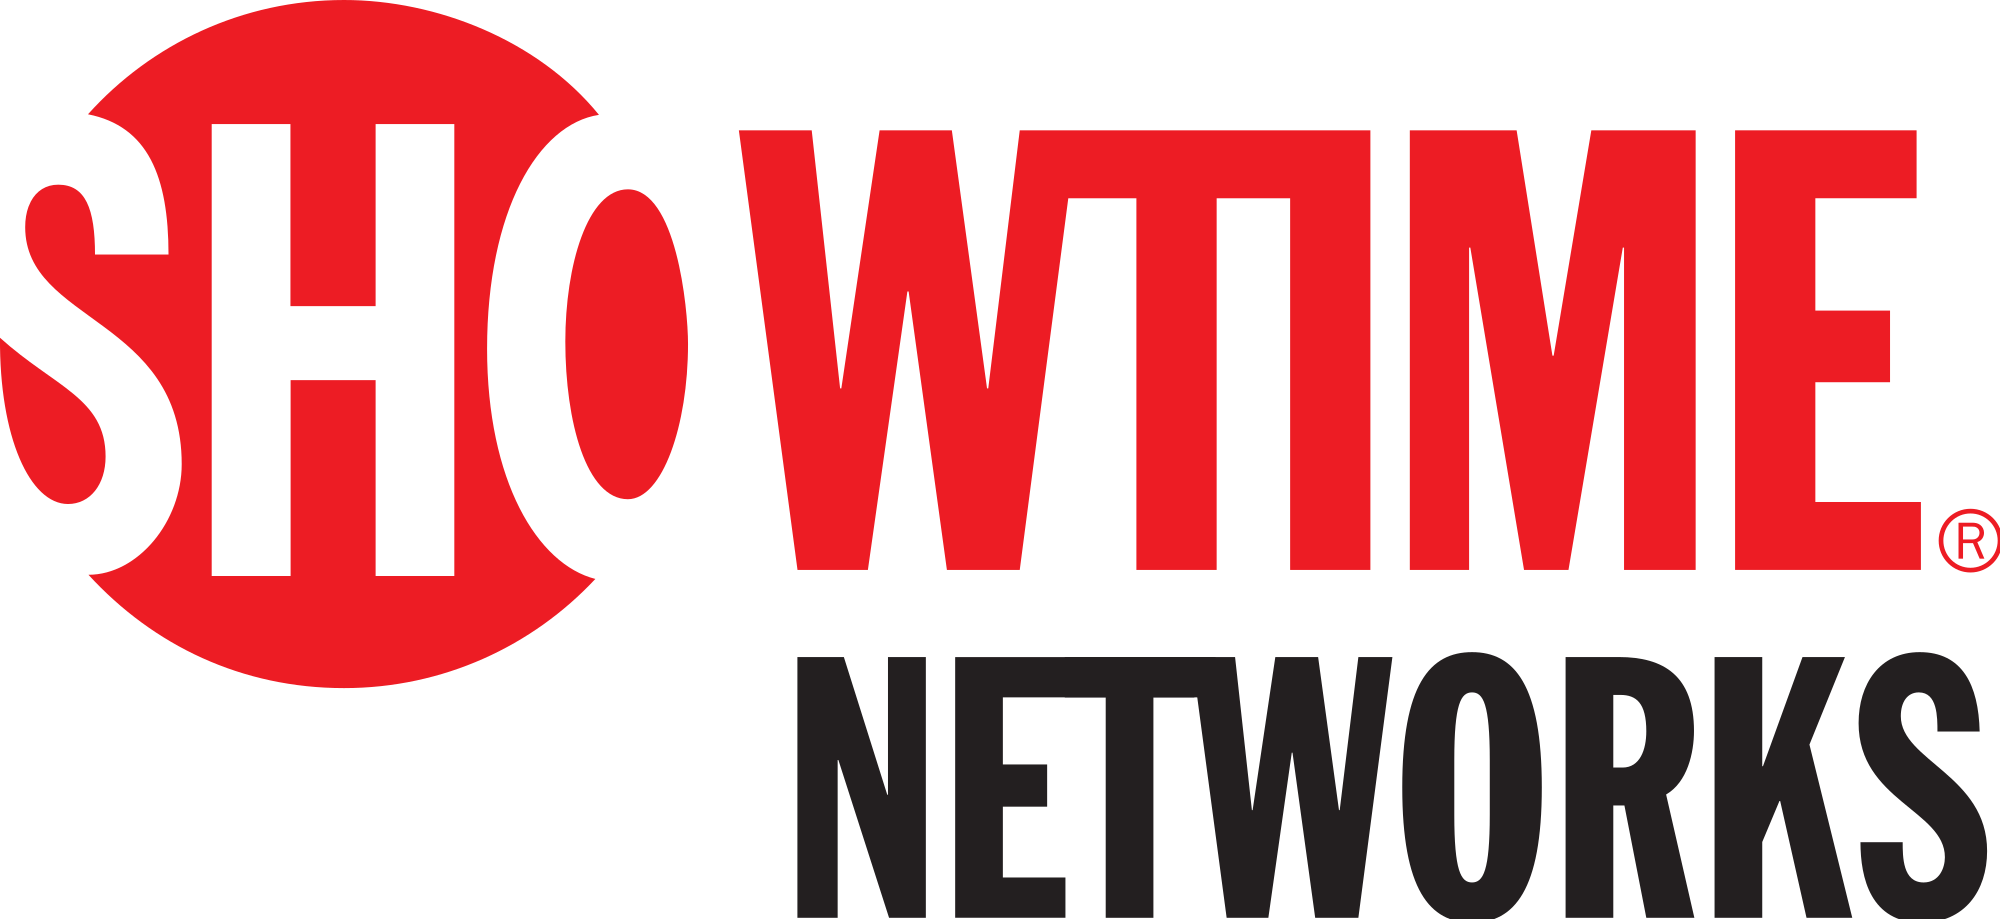 Showtime Networks - company